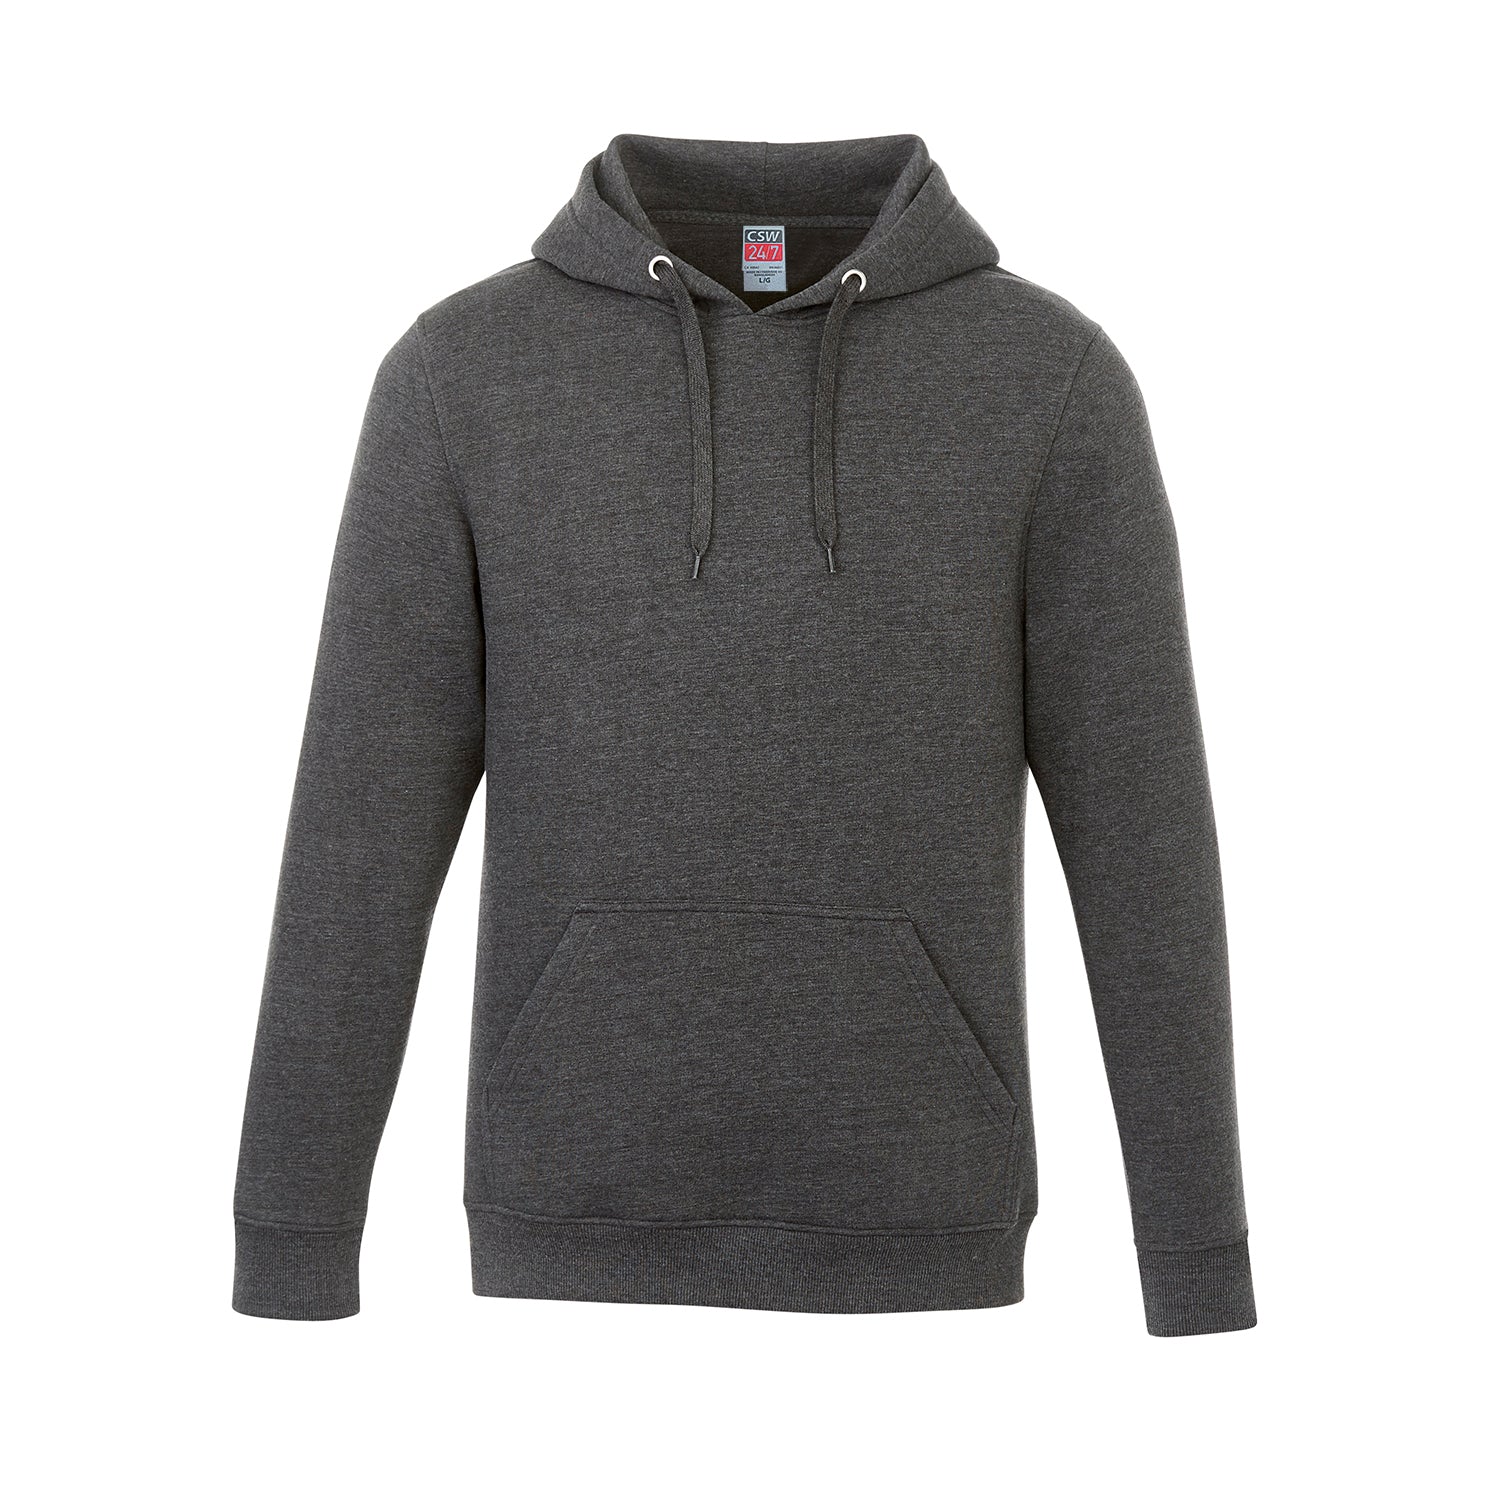 L00550 - Vault - Adult Pullover Hoodie - Charcoal Heather